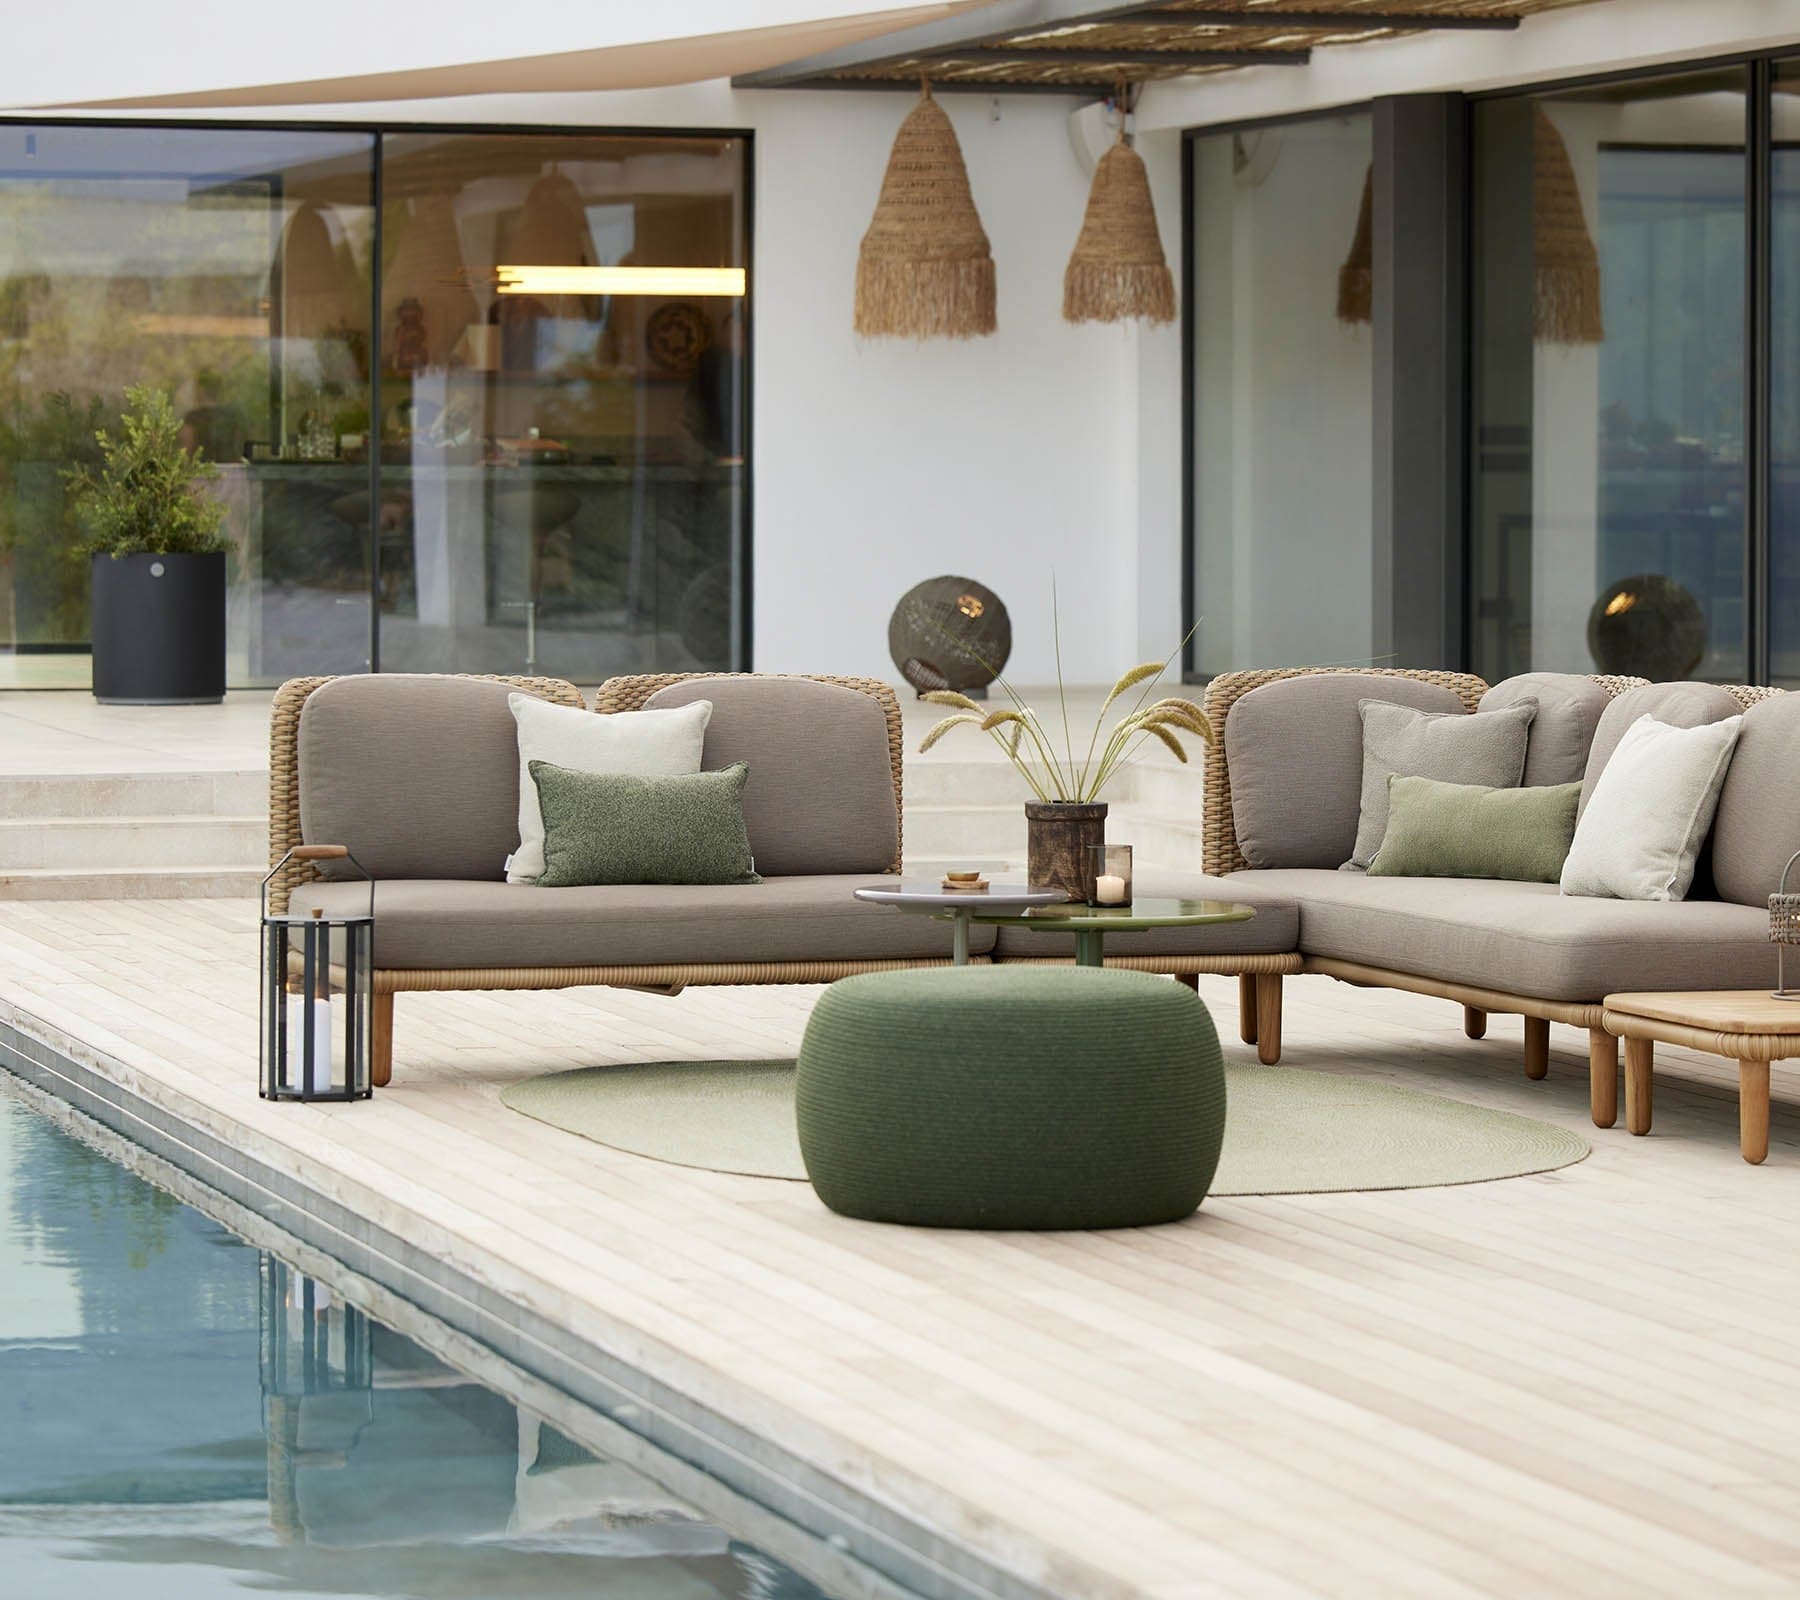 Boxhill's Arch Outdoor Back Cushion lifestyle image on Arch 2 Seater Sofa and Arch 3 Seater Sofa beside the pool